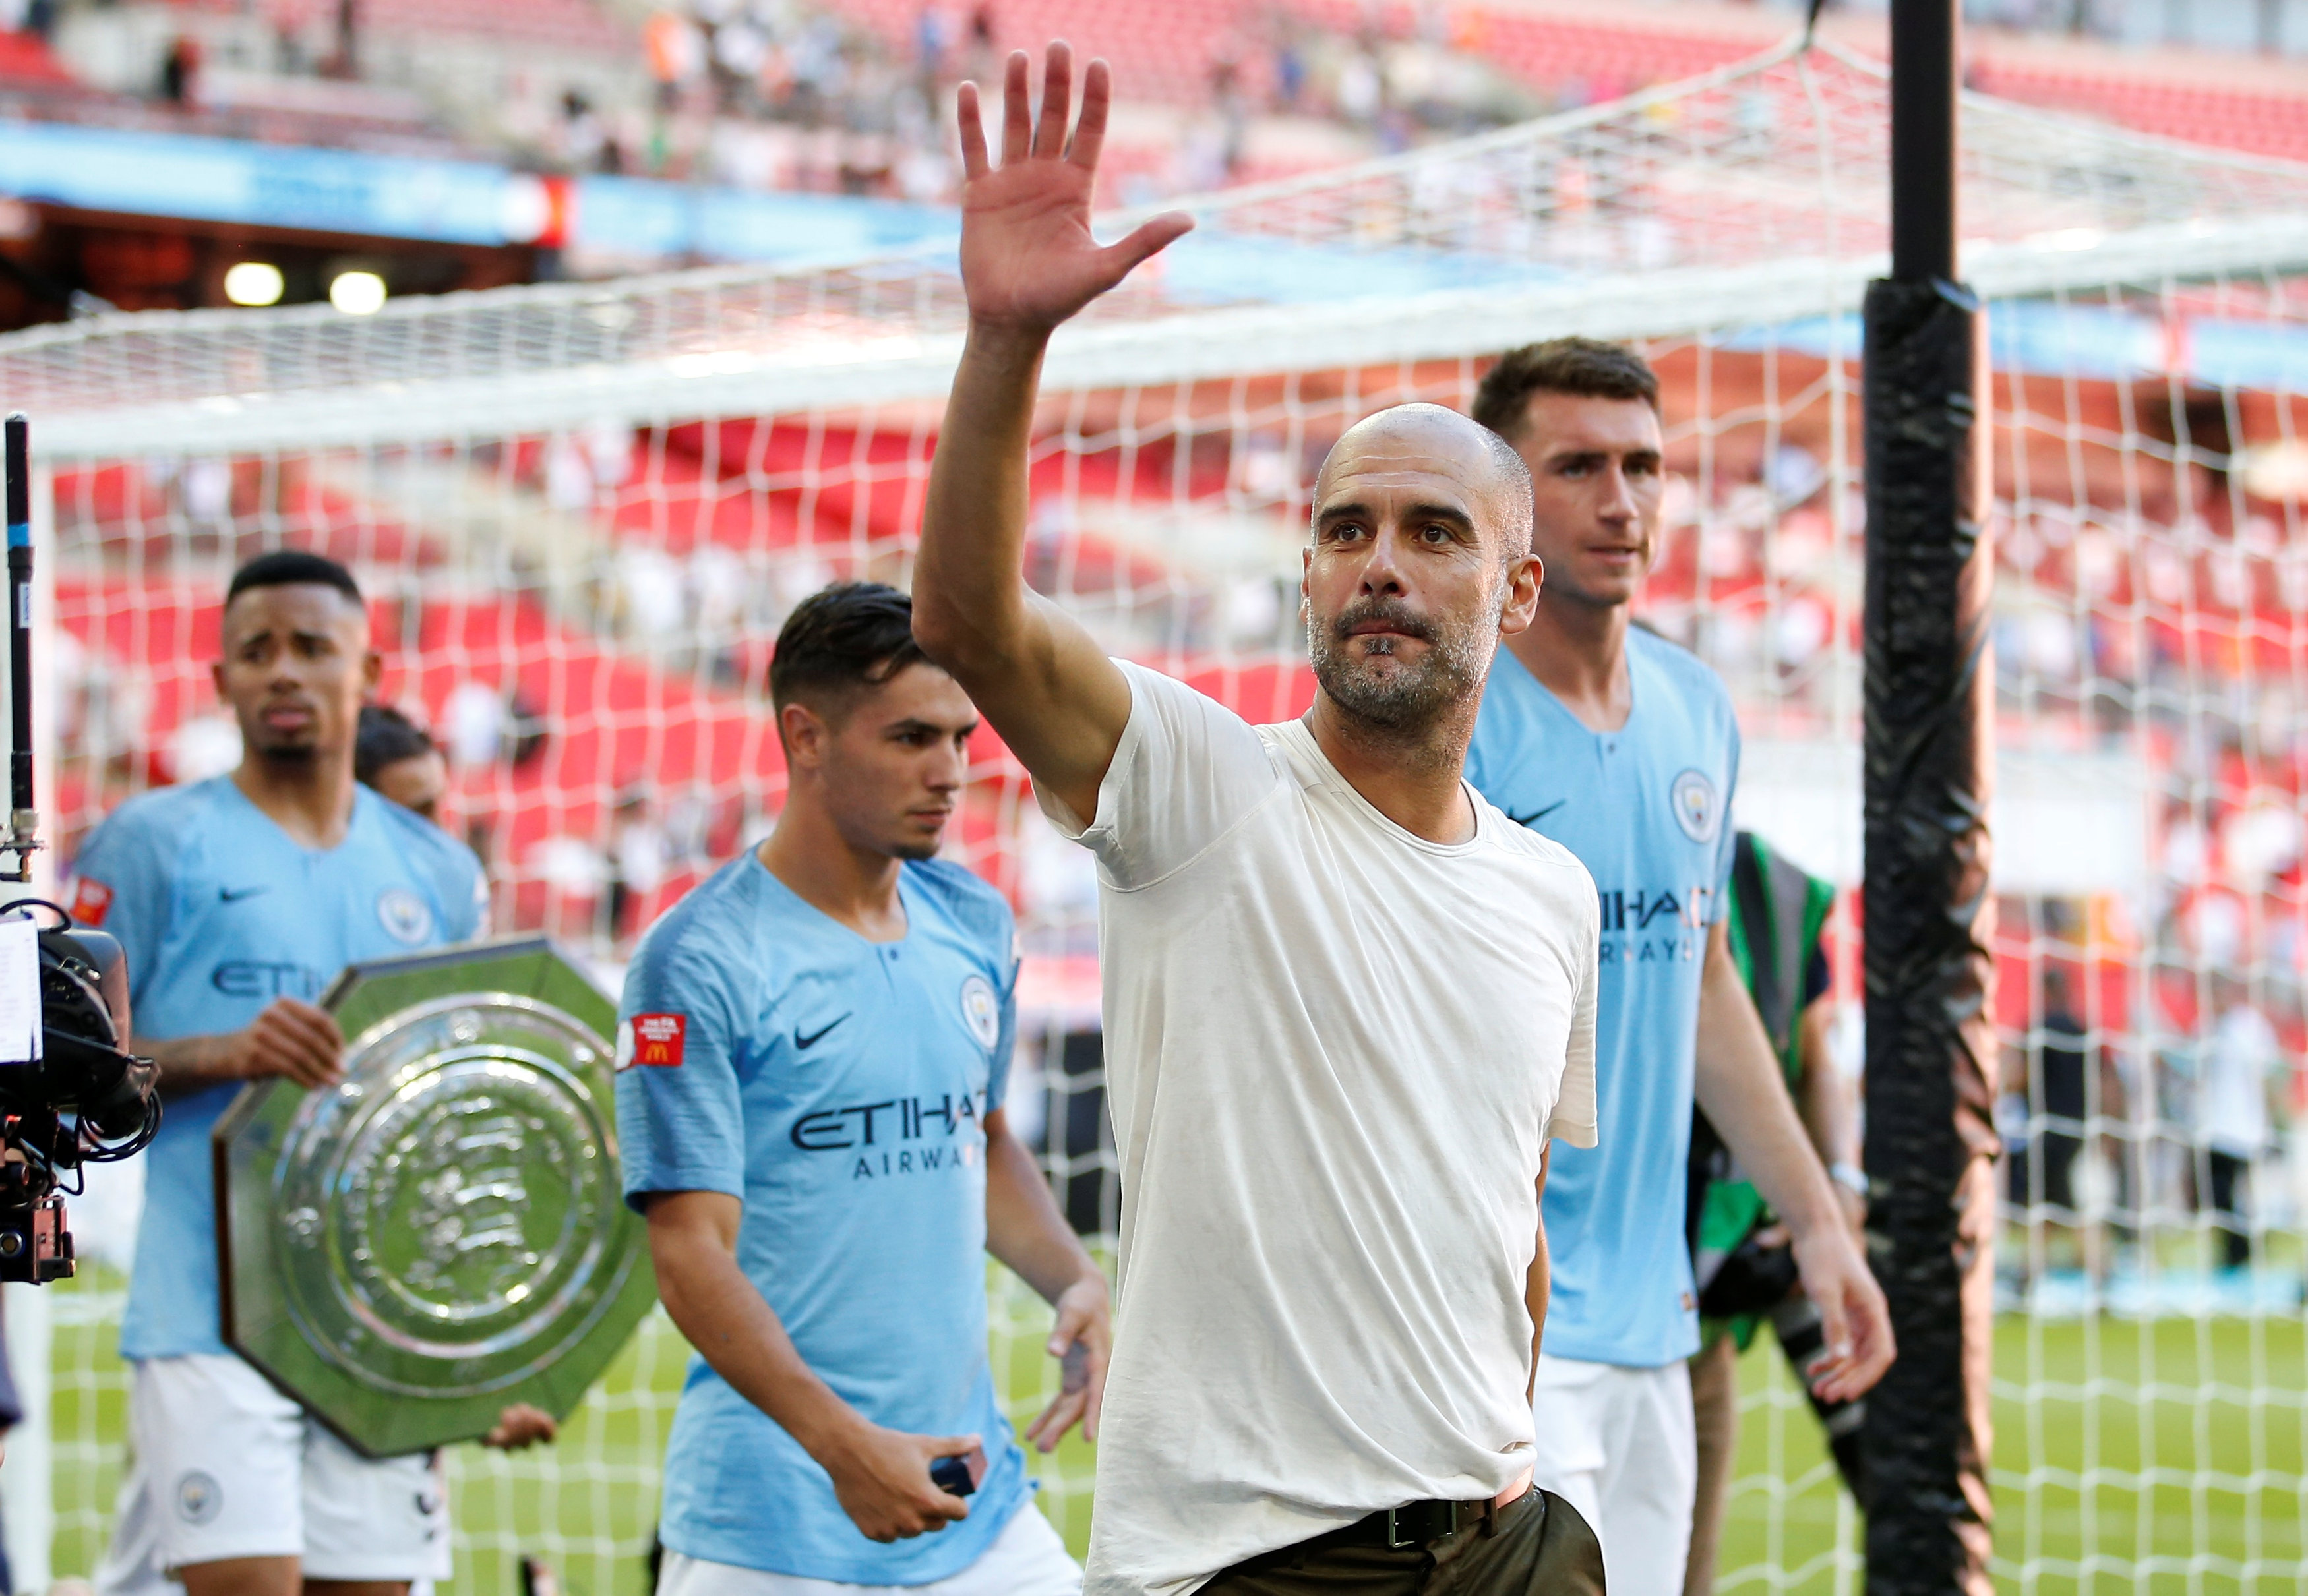 Football: Record-breaking City stick with winning formula